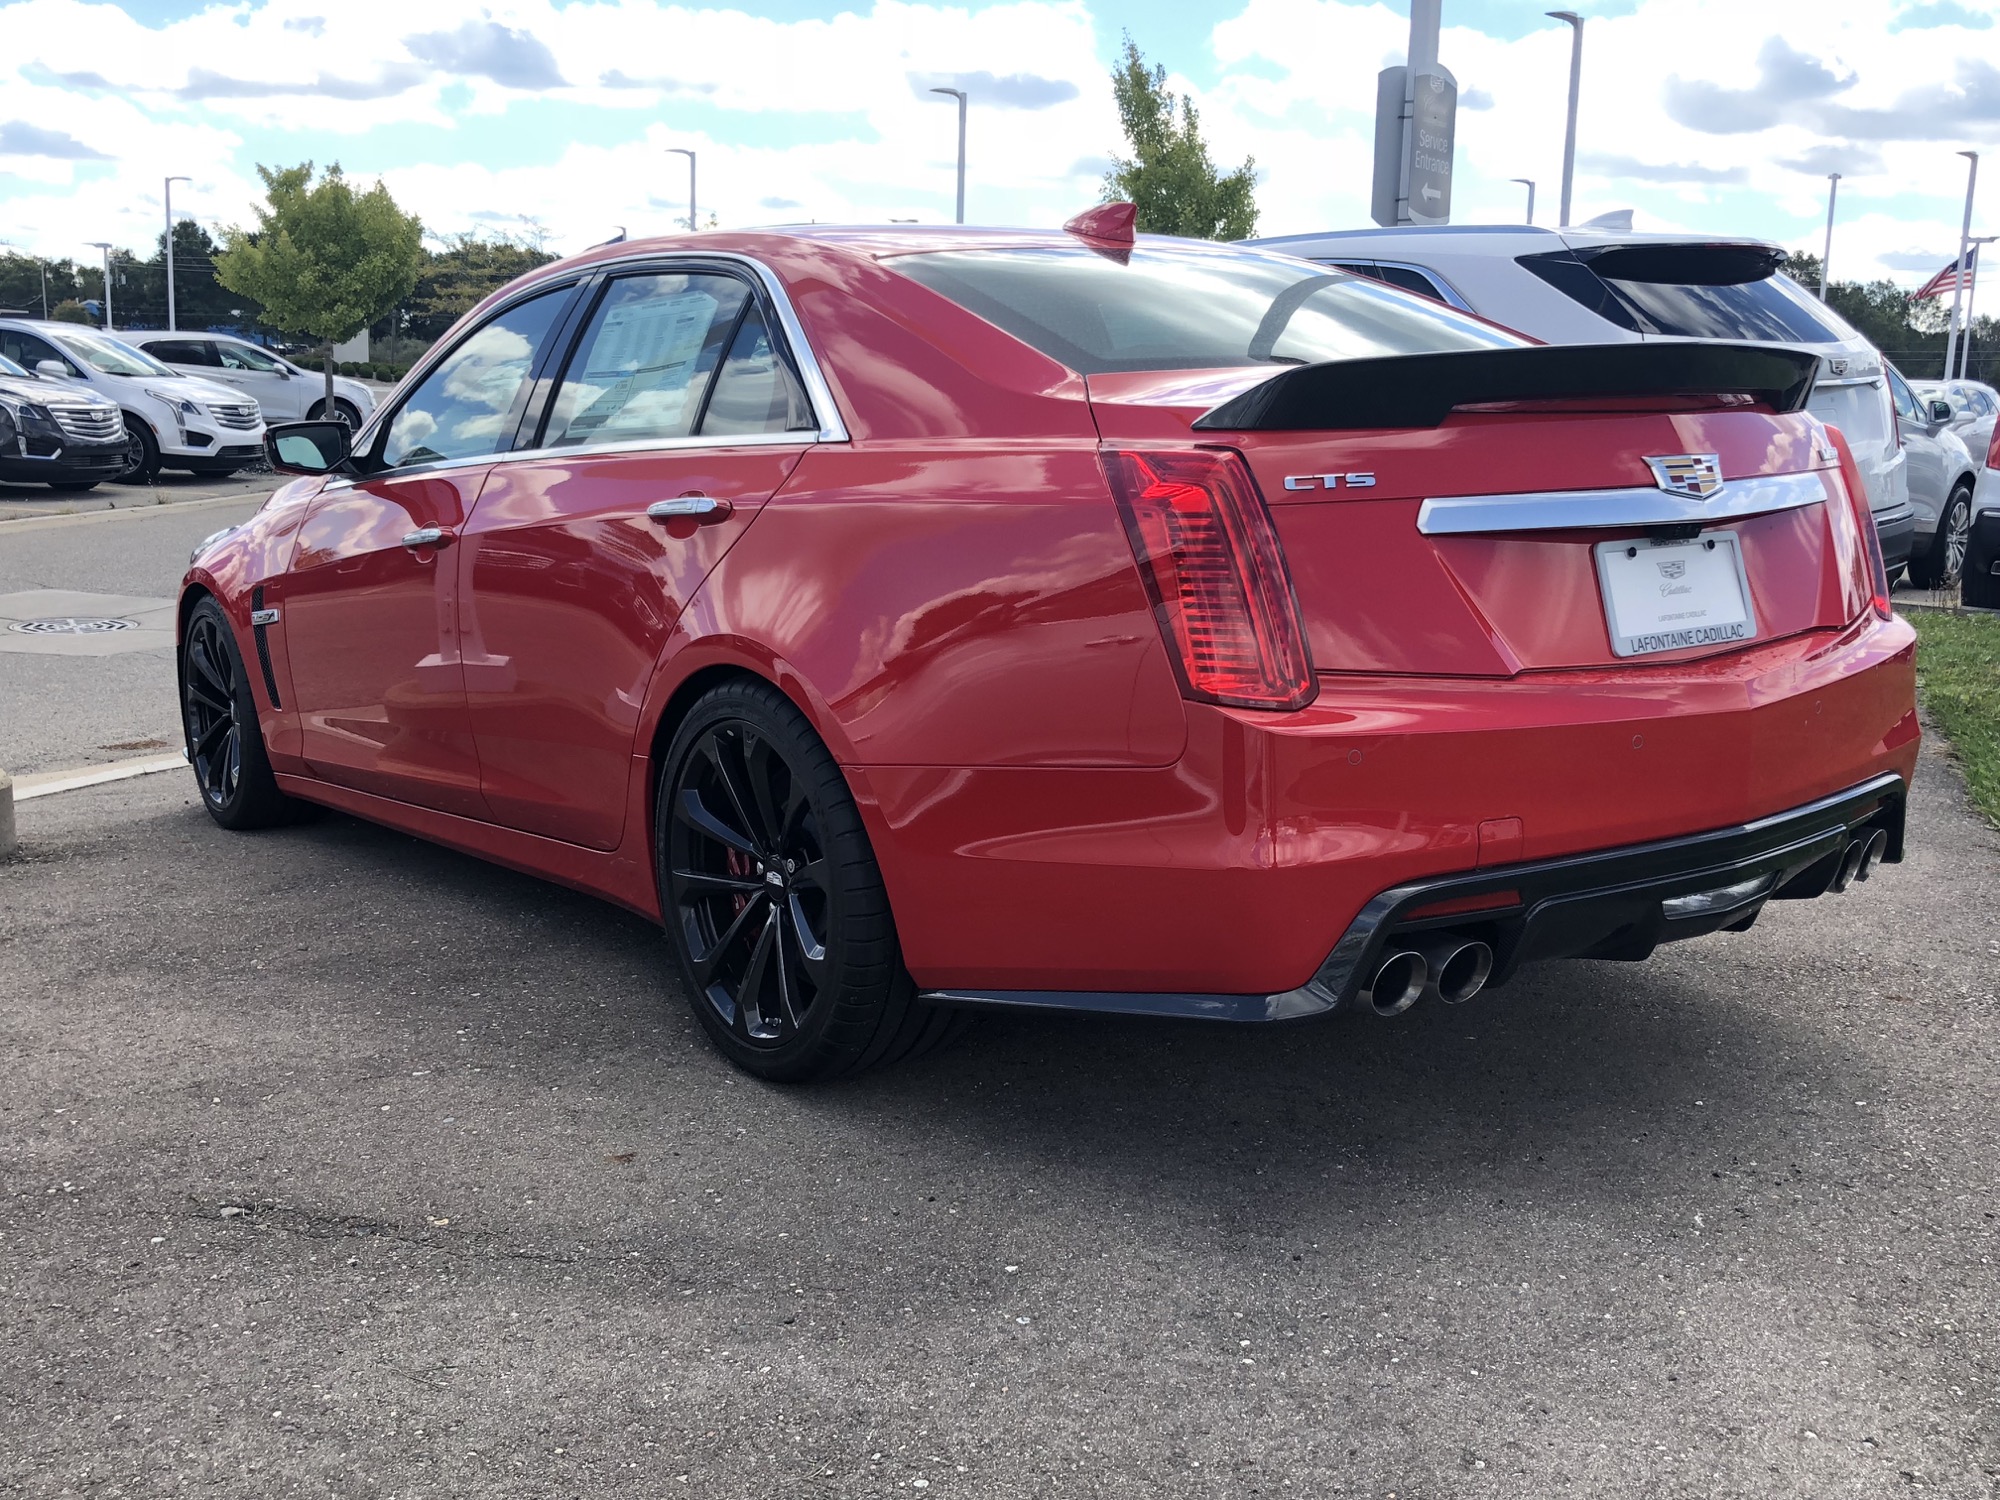 Details Emerge On Last Cadillac Cts V Ever Produced Gm